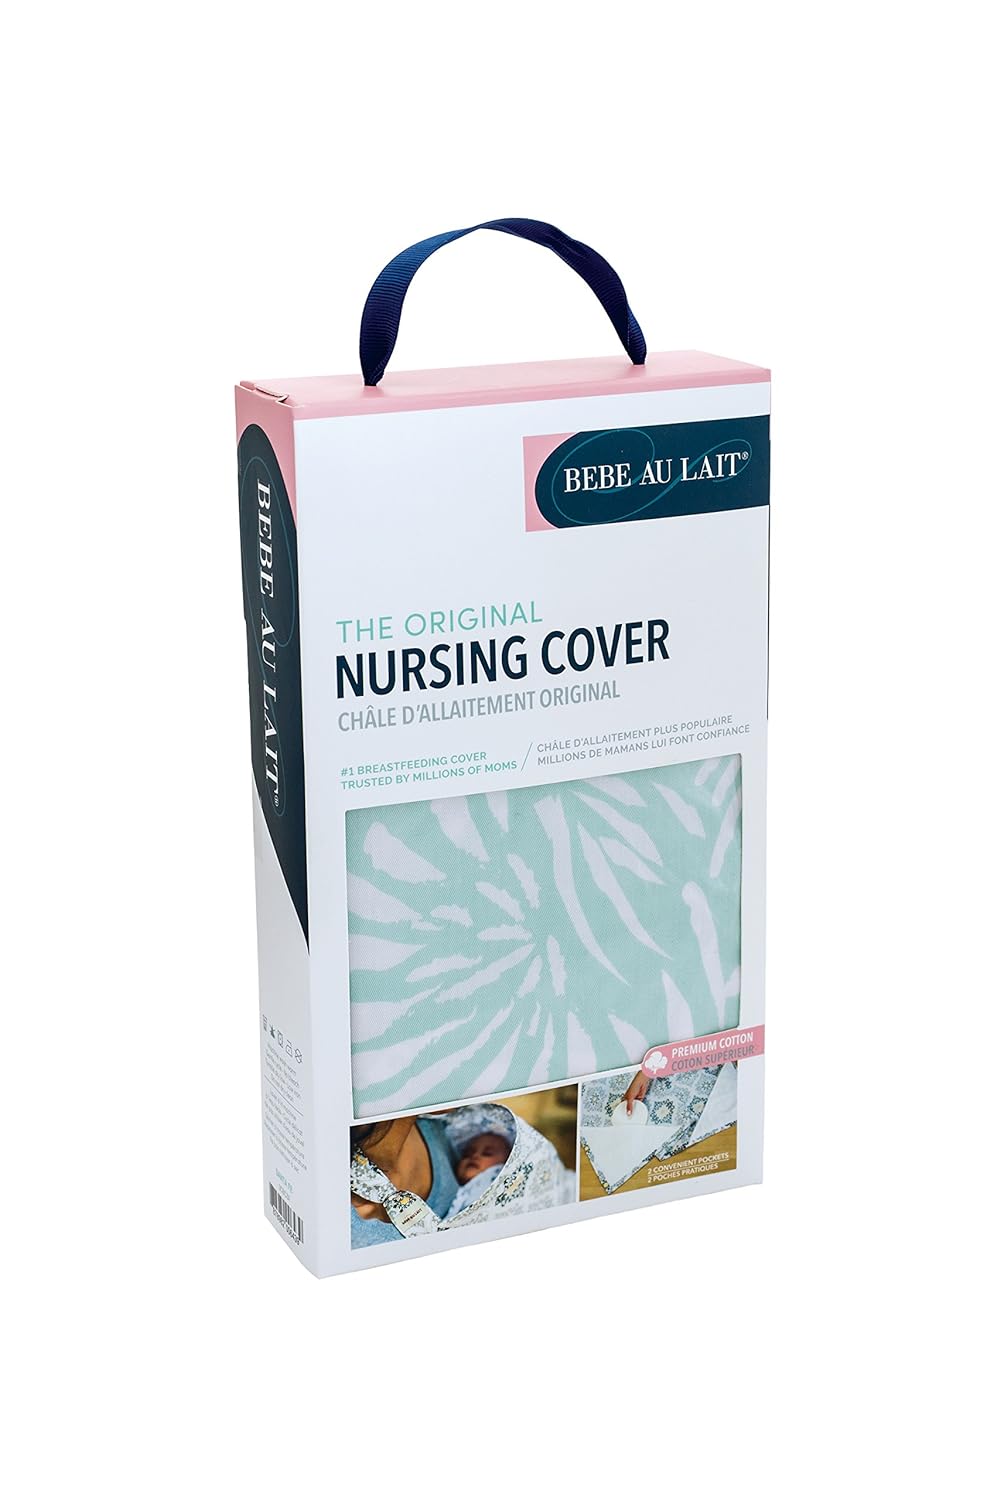 BEBE AU LAIT - 100% Premium Cotton Privacy Nursing Cover with Open Neckline. Lightweight, Breathable Breastfeeding Blanket. One Size Fits All (Haven)